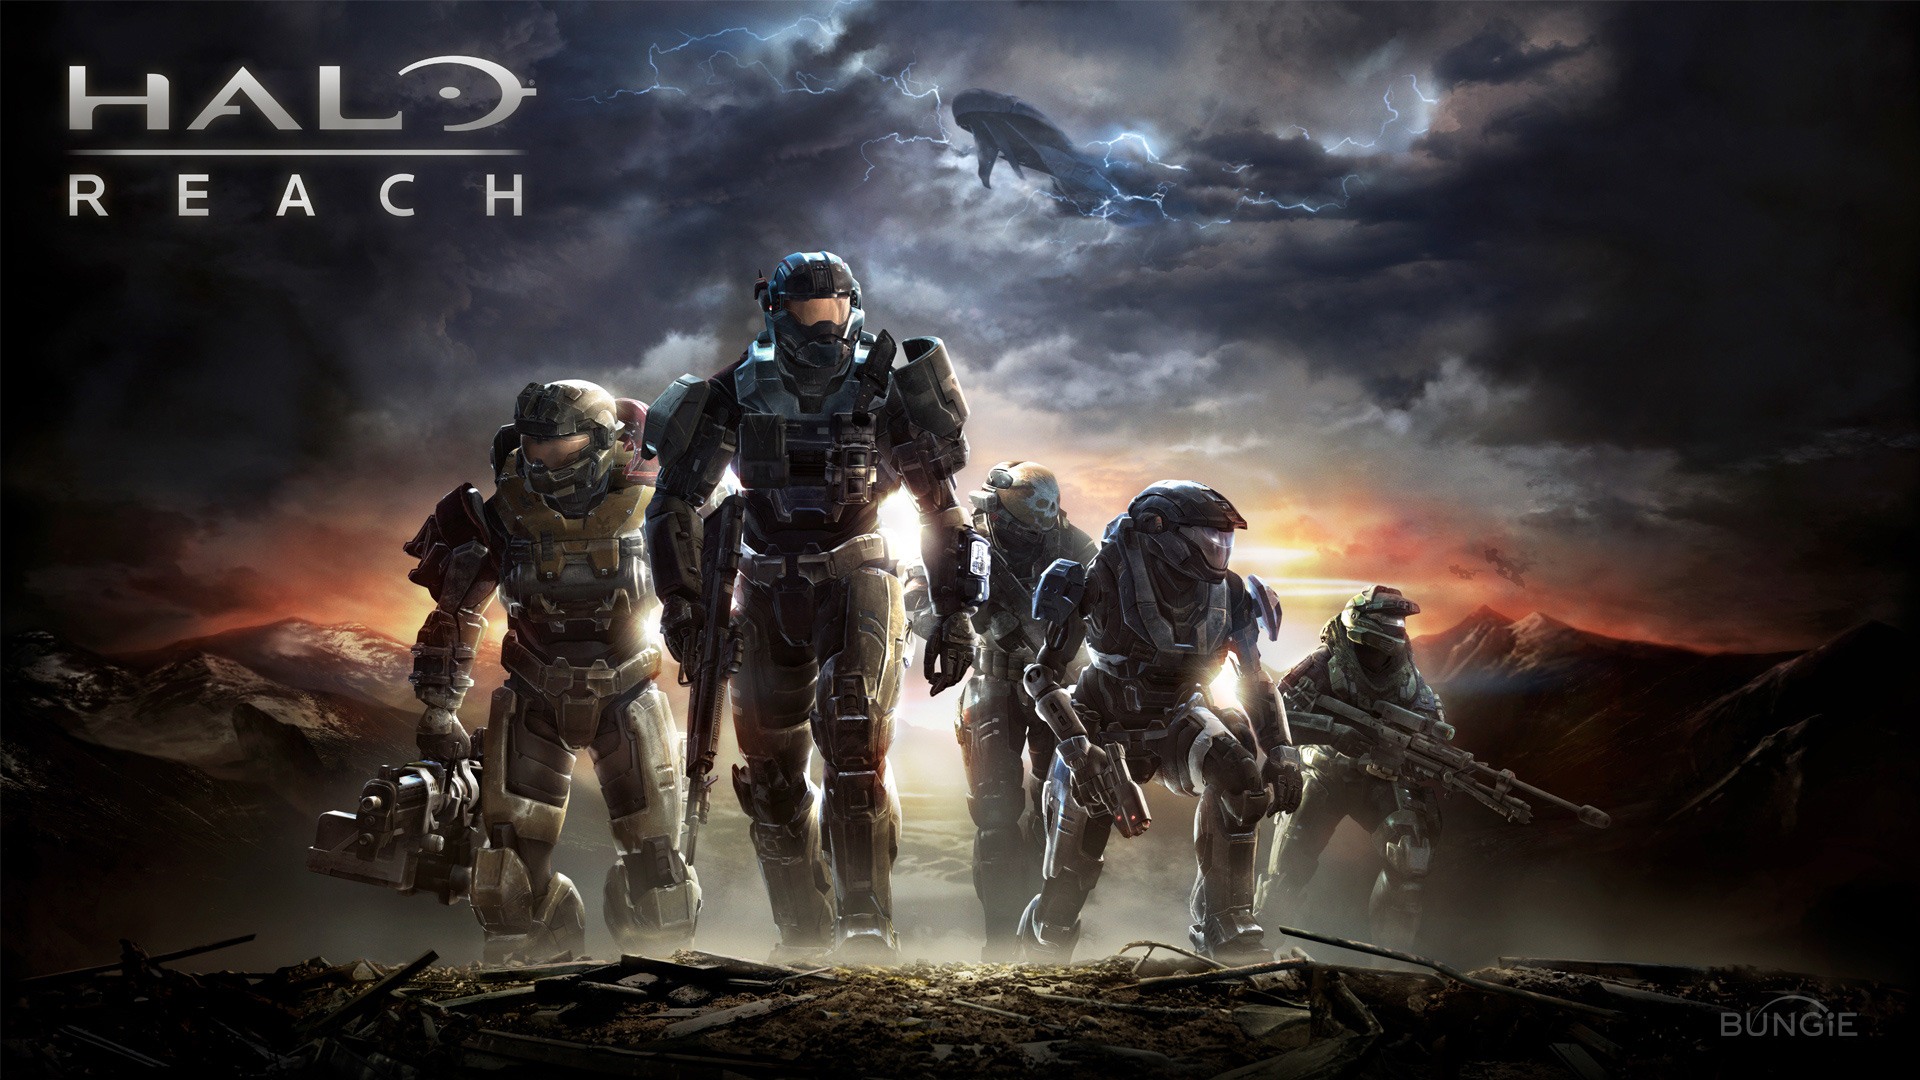 Halo game HD wallpapers #17 - 1920x1080